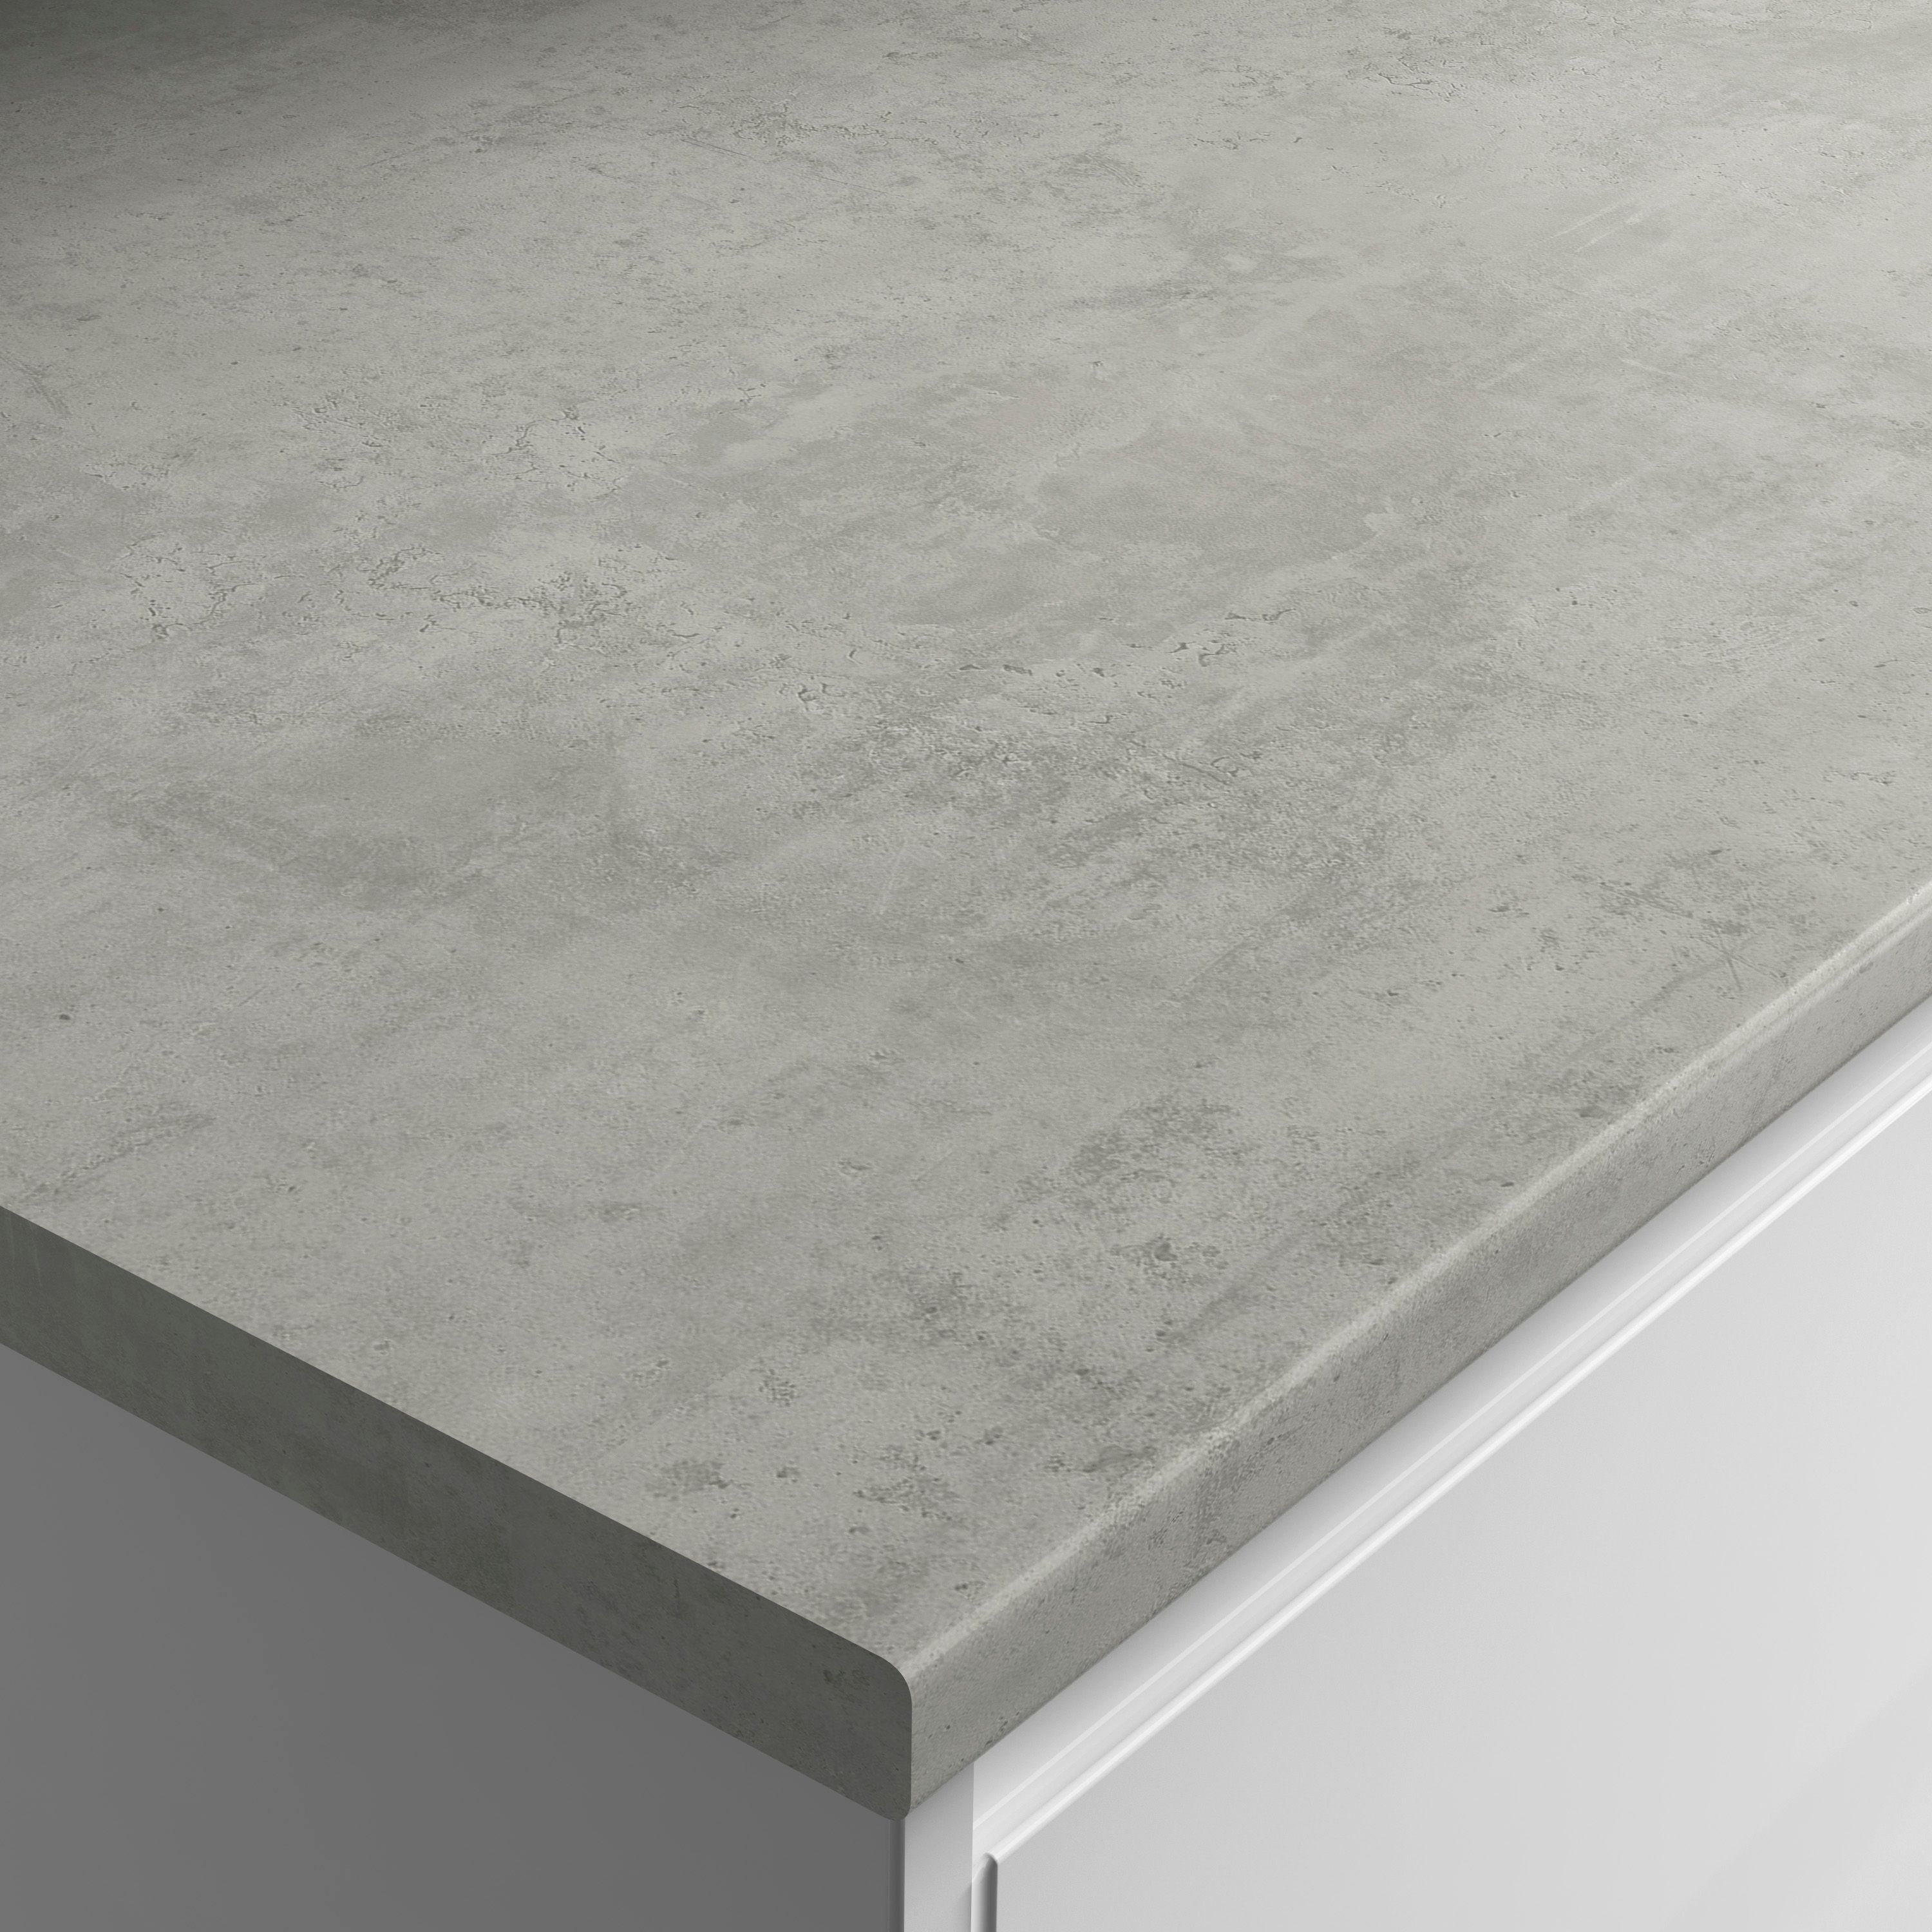 Image of Wickes Laminate Worktop - Cloudy Cement 600mm x 28mm x 3m